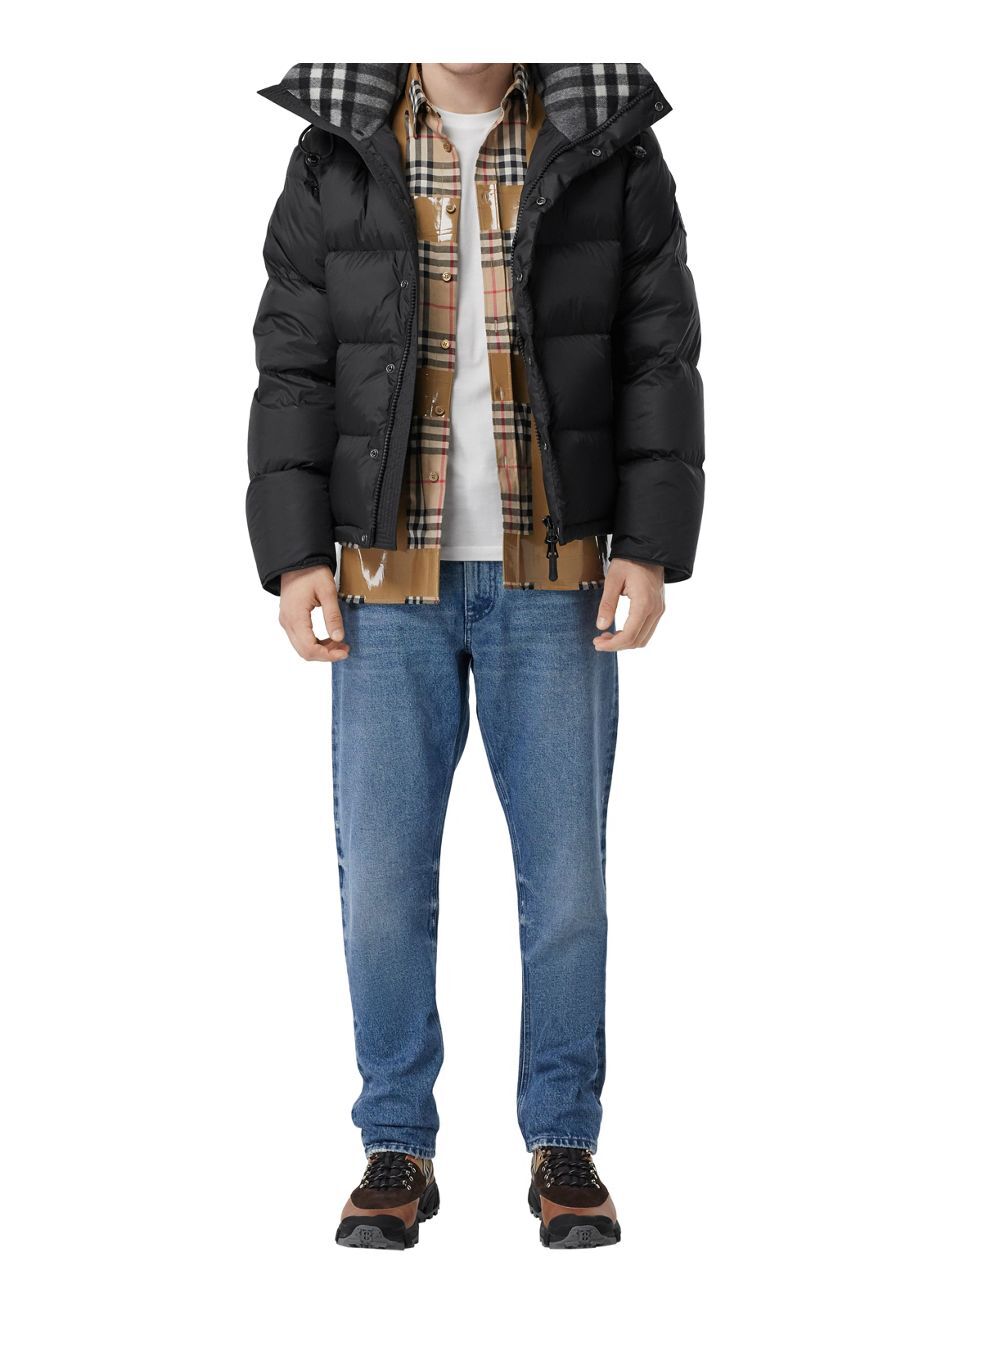 burberry hooded puffer jacket